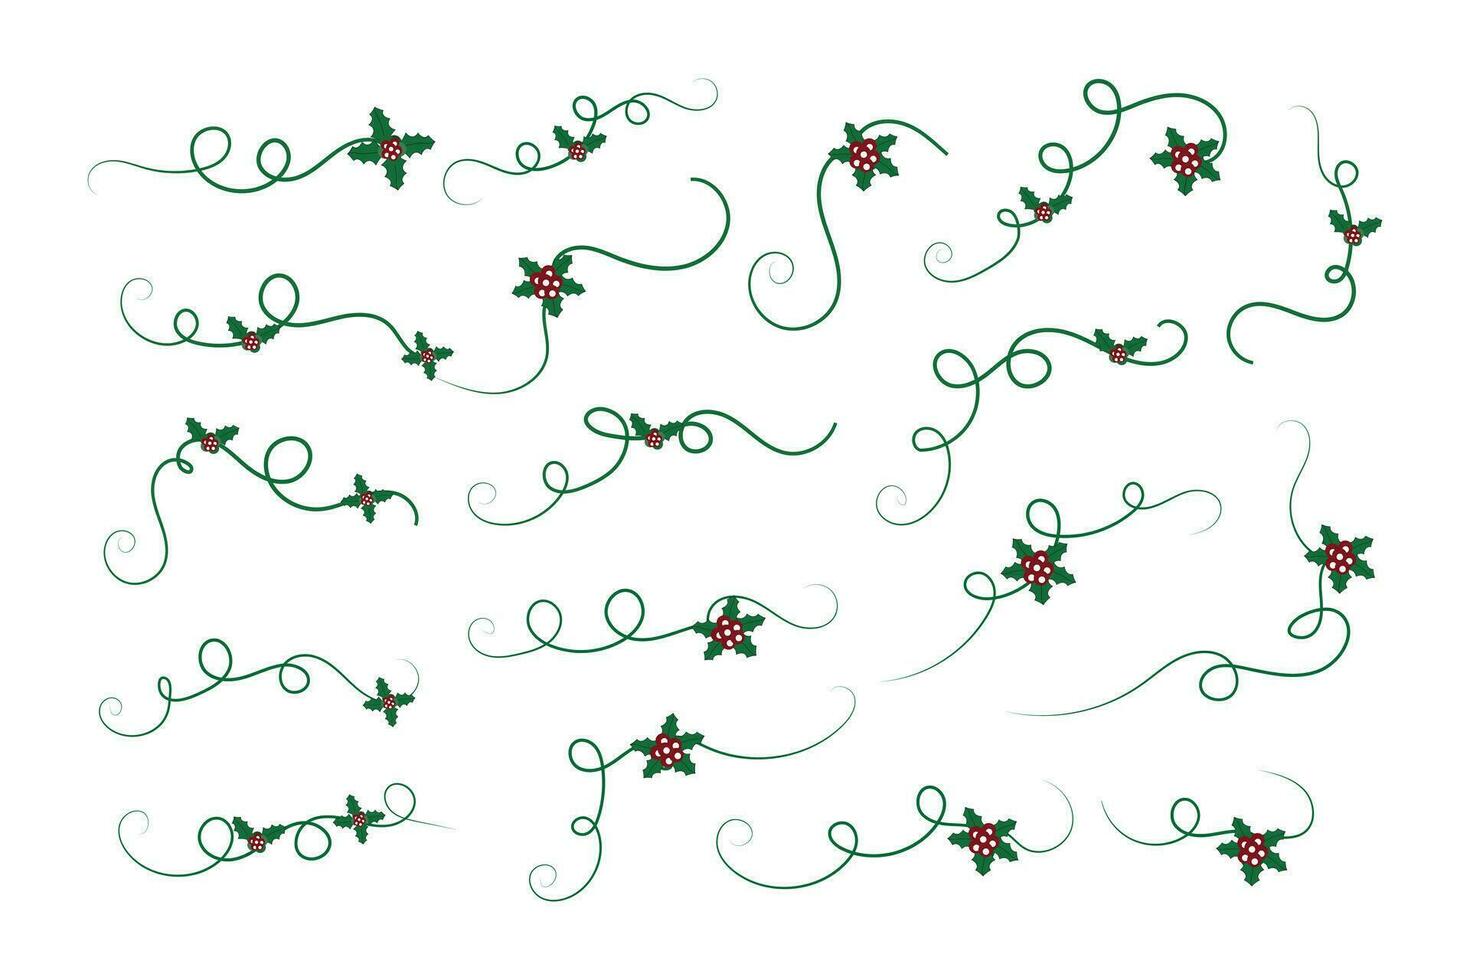 Christmas Flourishes Swirls dividers lines Decorative Elements, Vintage Calligraphy Scroll Merry Christmas blue and red holly ornaments, Winter Holly headers lettering border page decor green Ornate vector